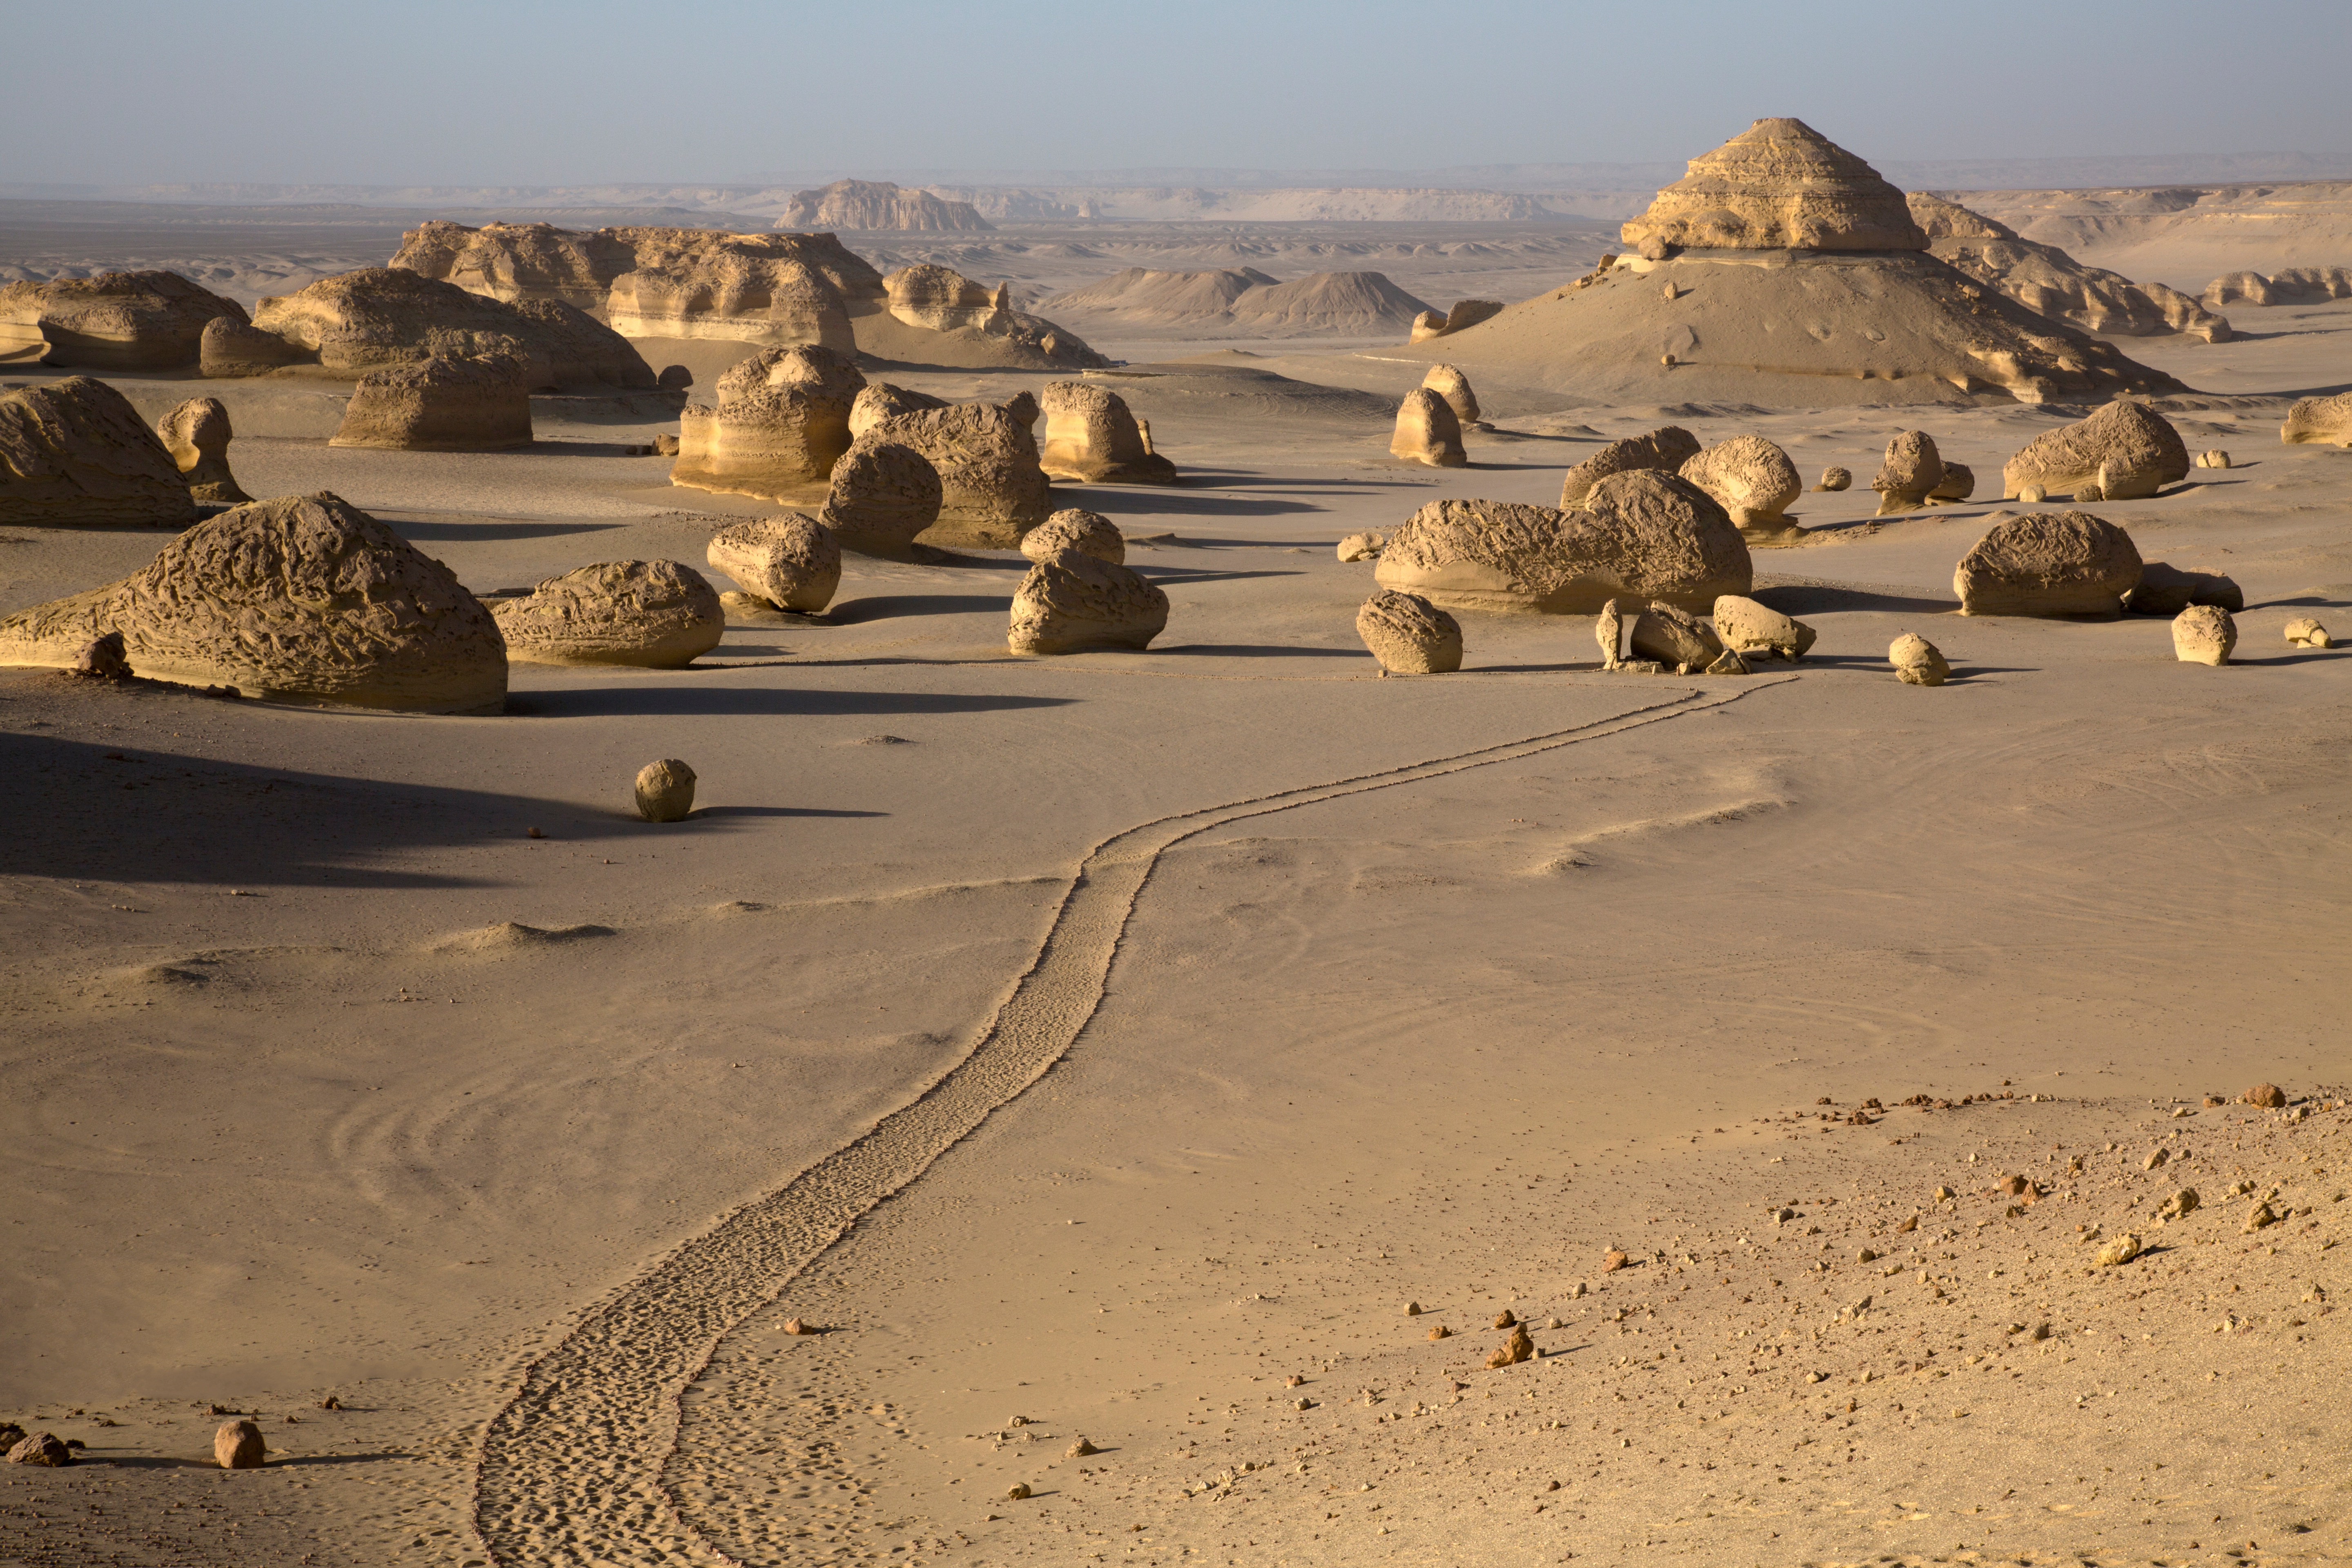 The valley of whales in Egypt - Al Fayoum